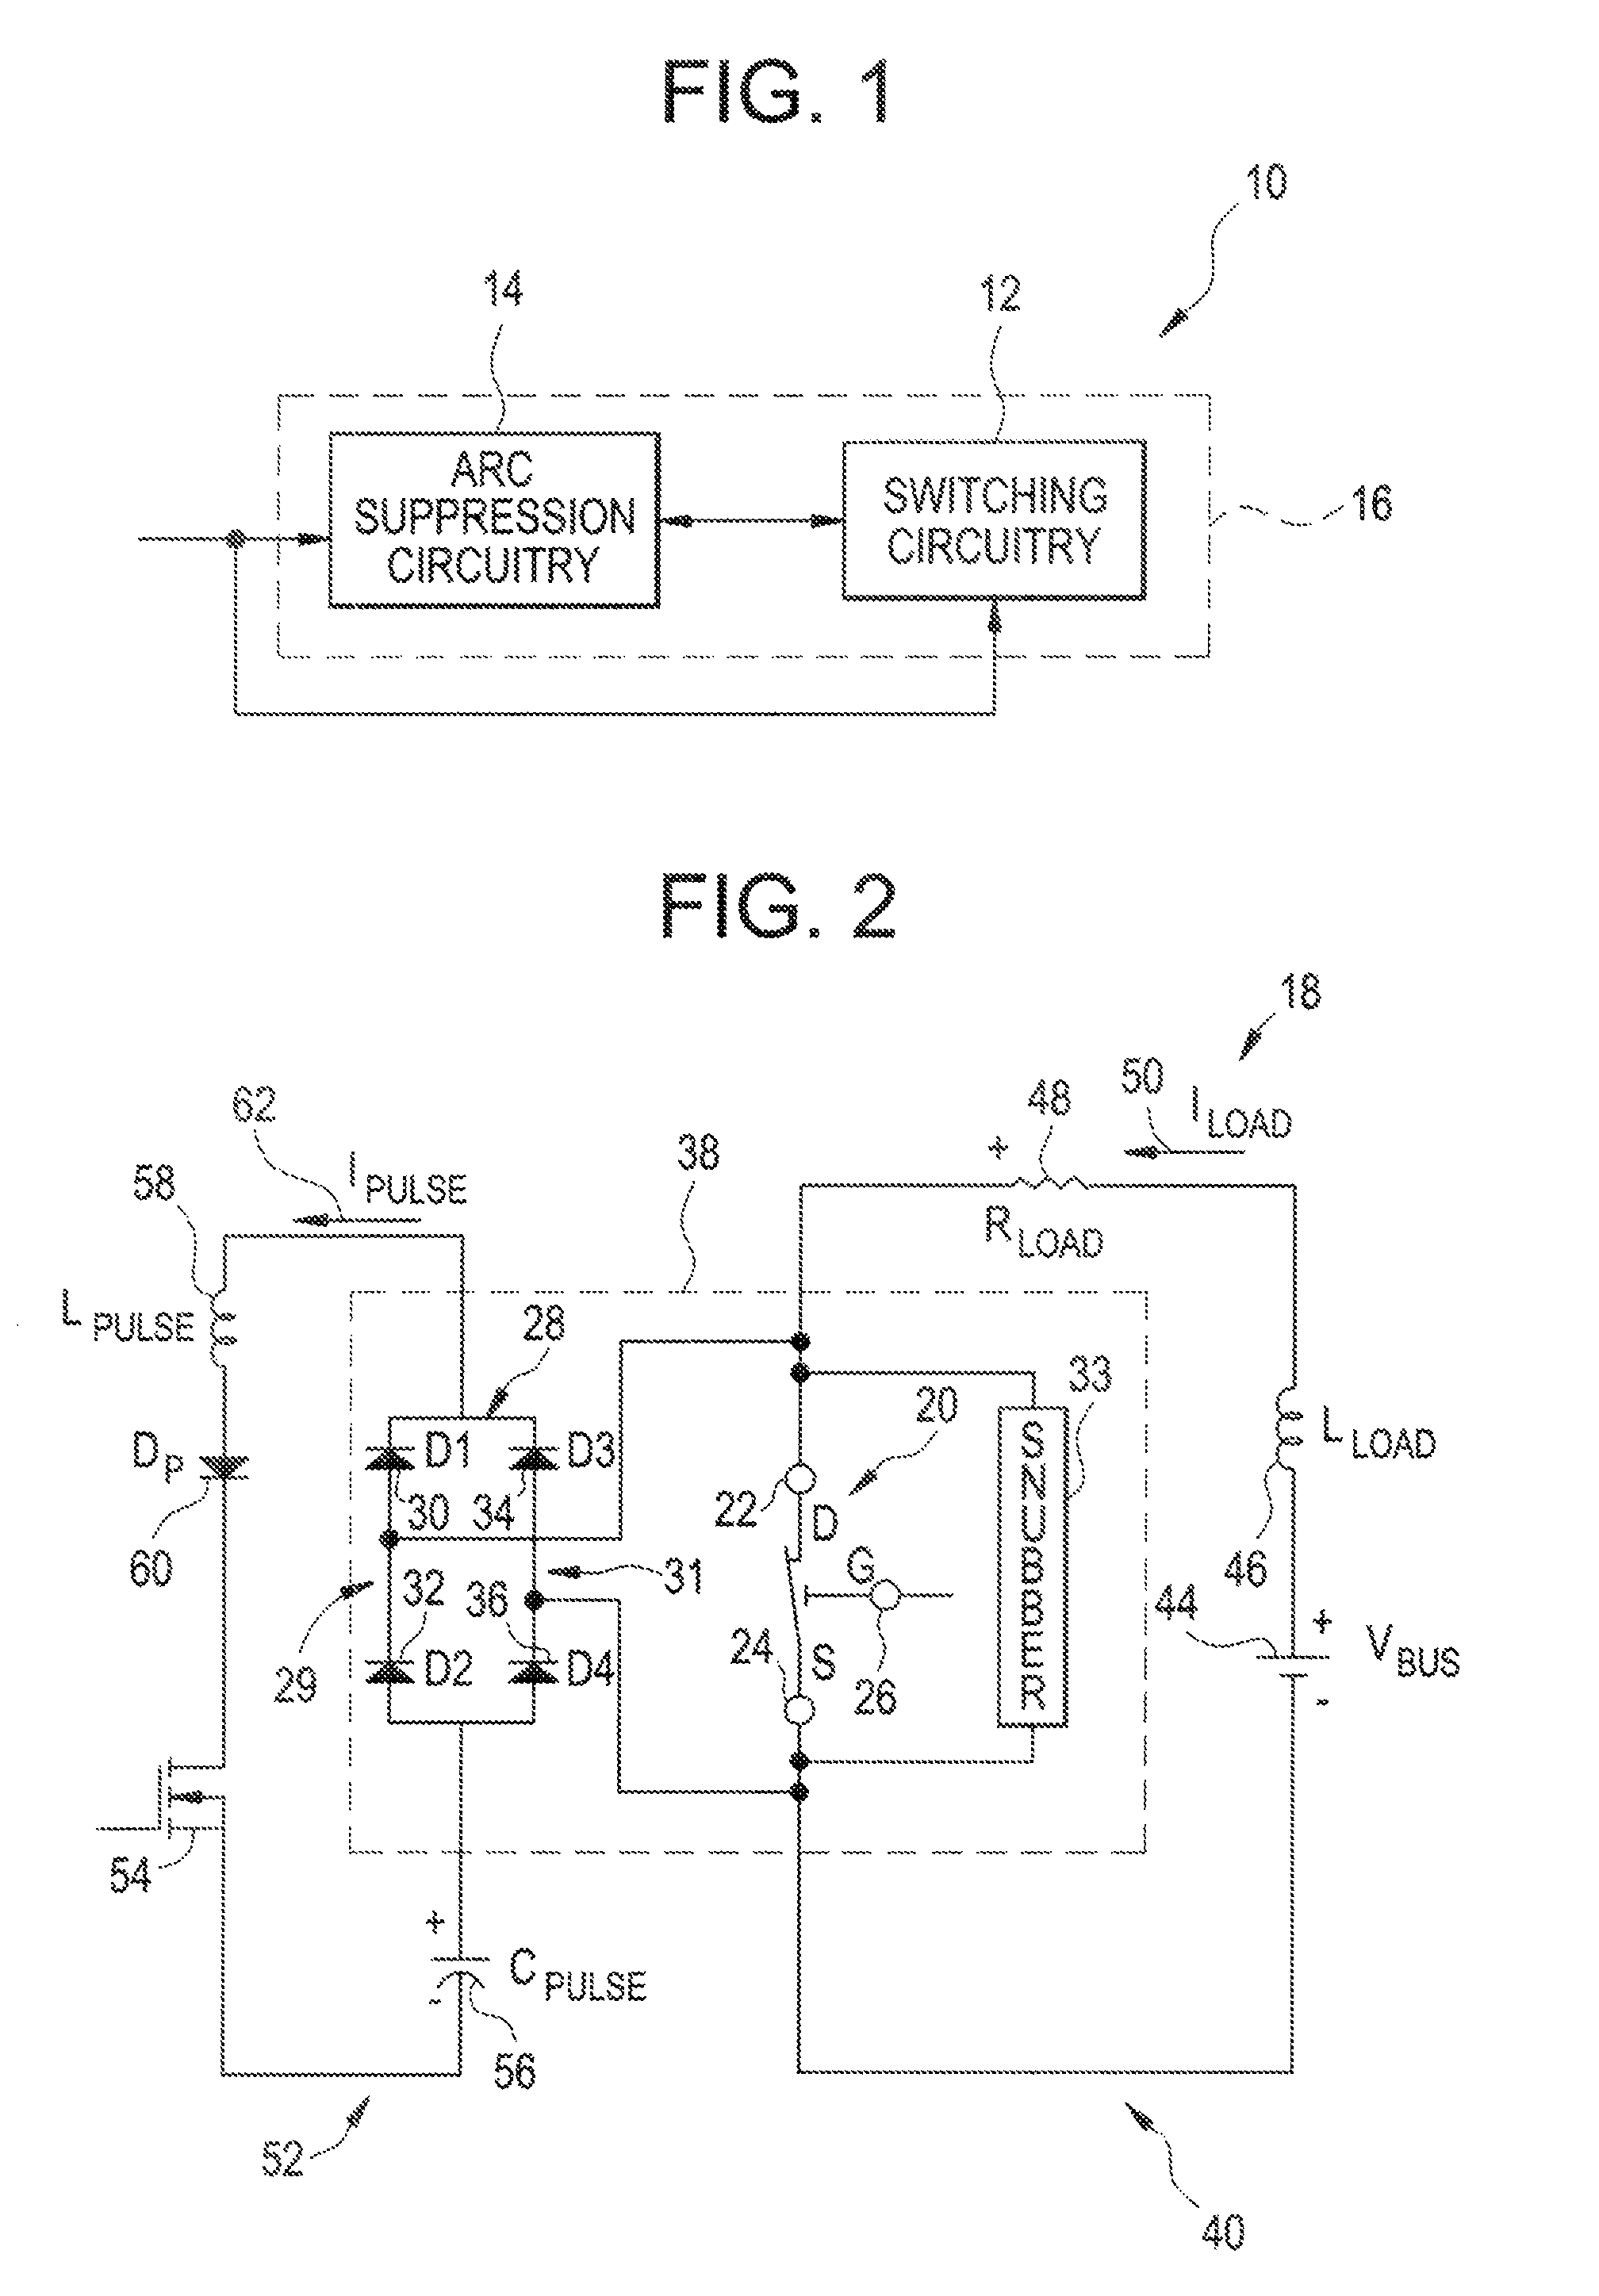 MEMS micro-switch array based on current limiting enabled circuit interrupting apparatus